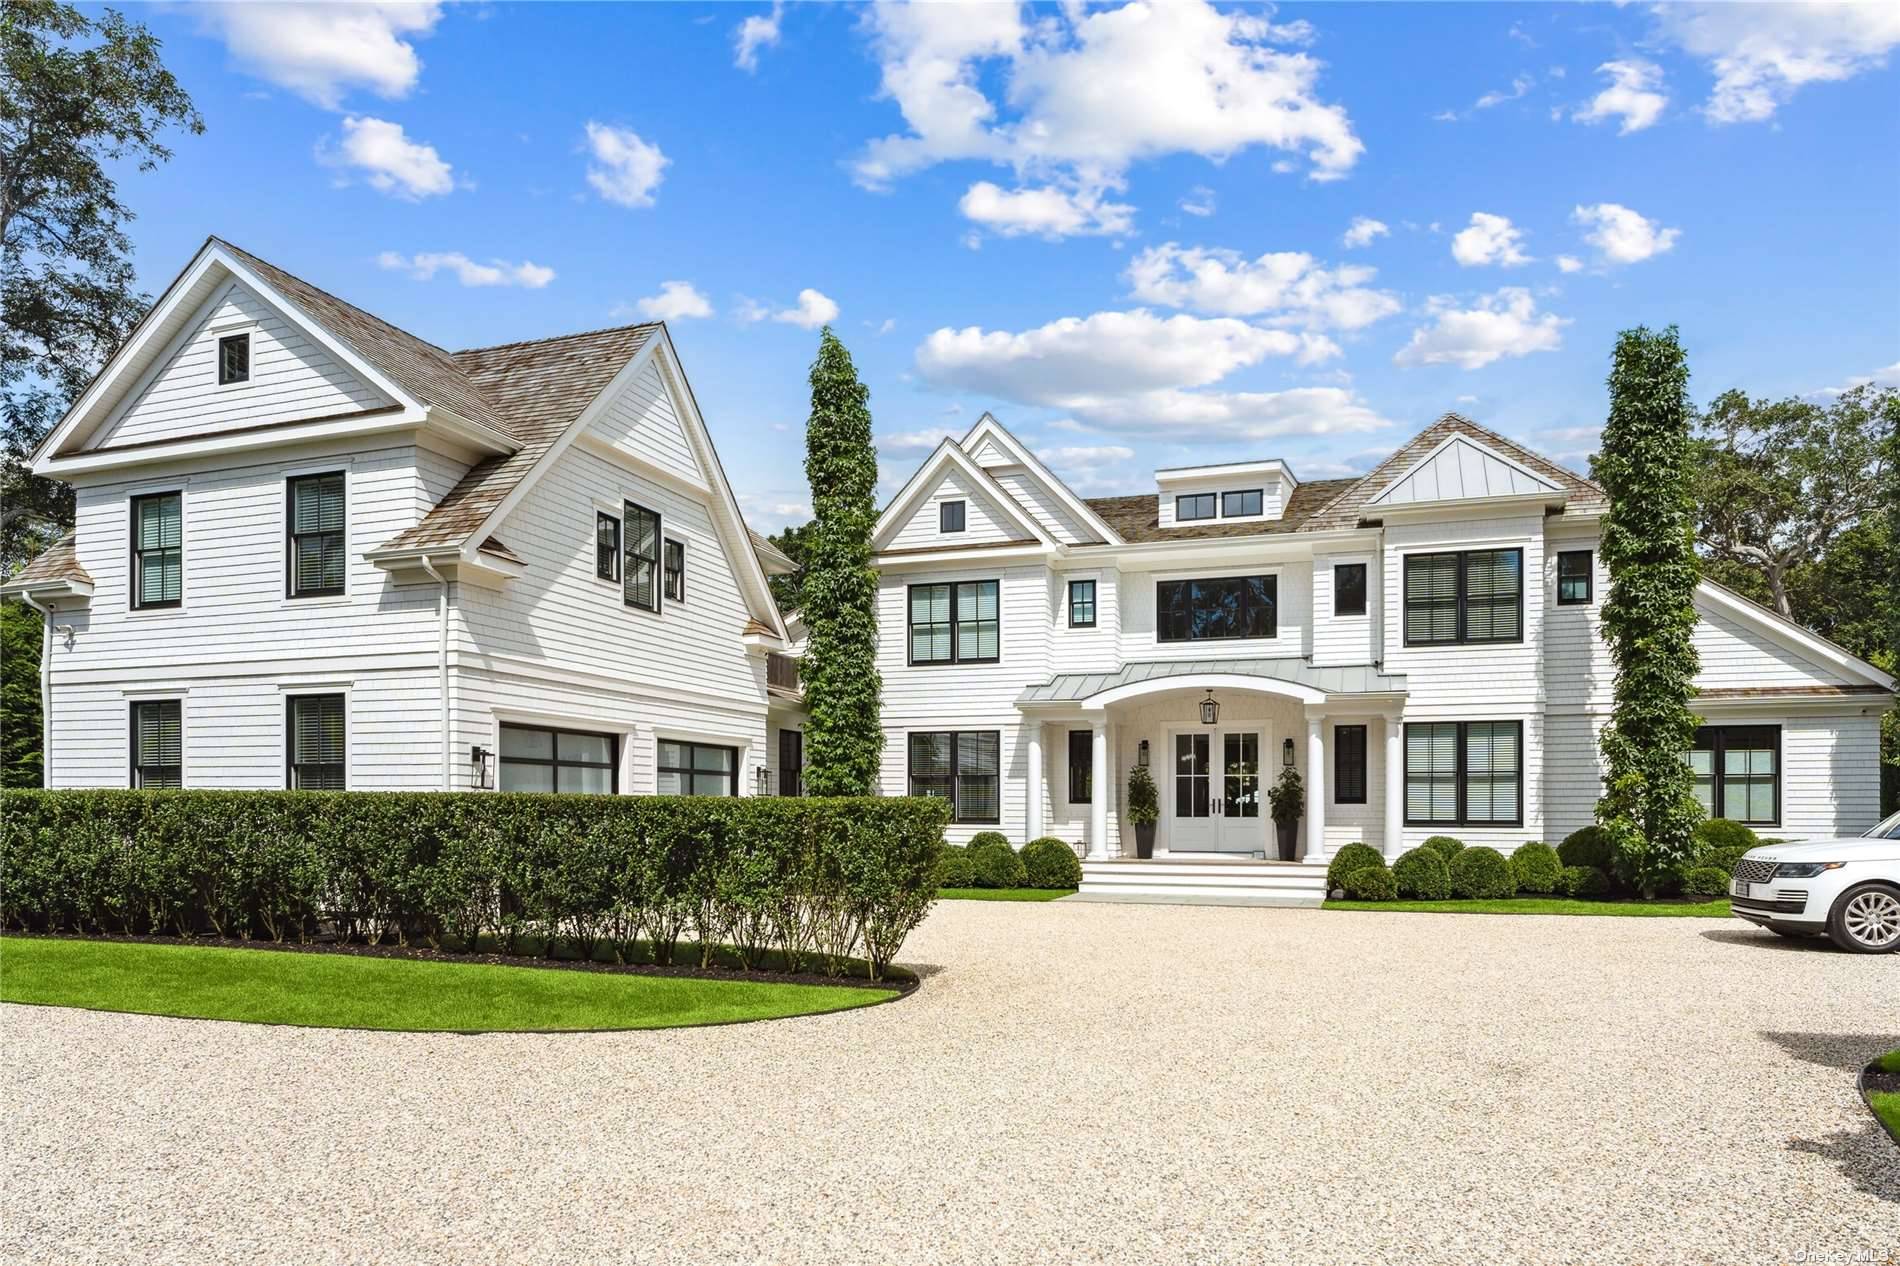 In the heart of Westhampton Beach Village, 250 Mill Road is perfectly designed for luxury, comfort and privacy.